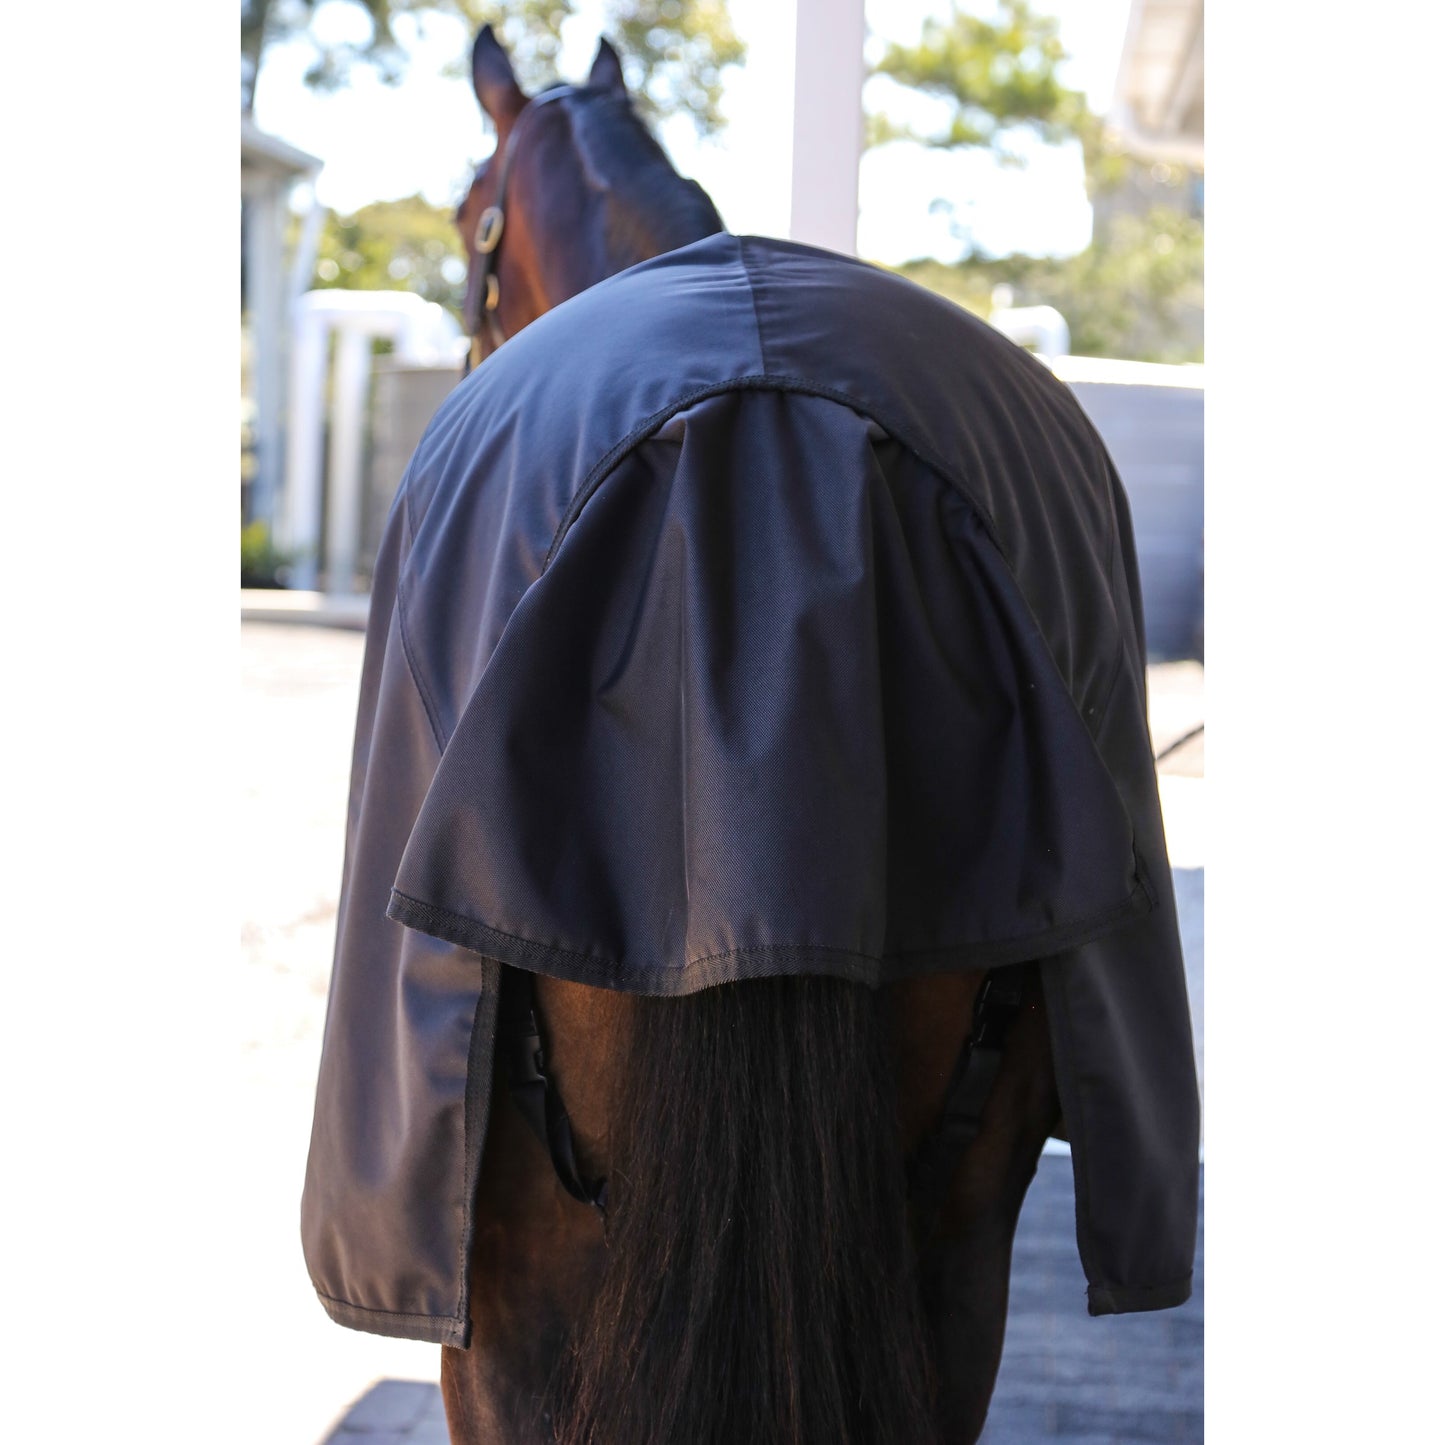 Deluxe Top/Rain Sheets-Diamond Deluxe Horsewear-The Equestrian